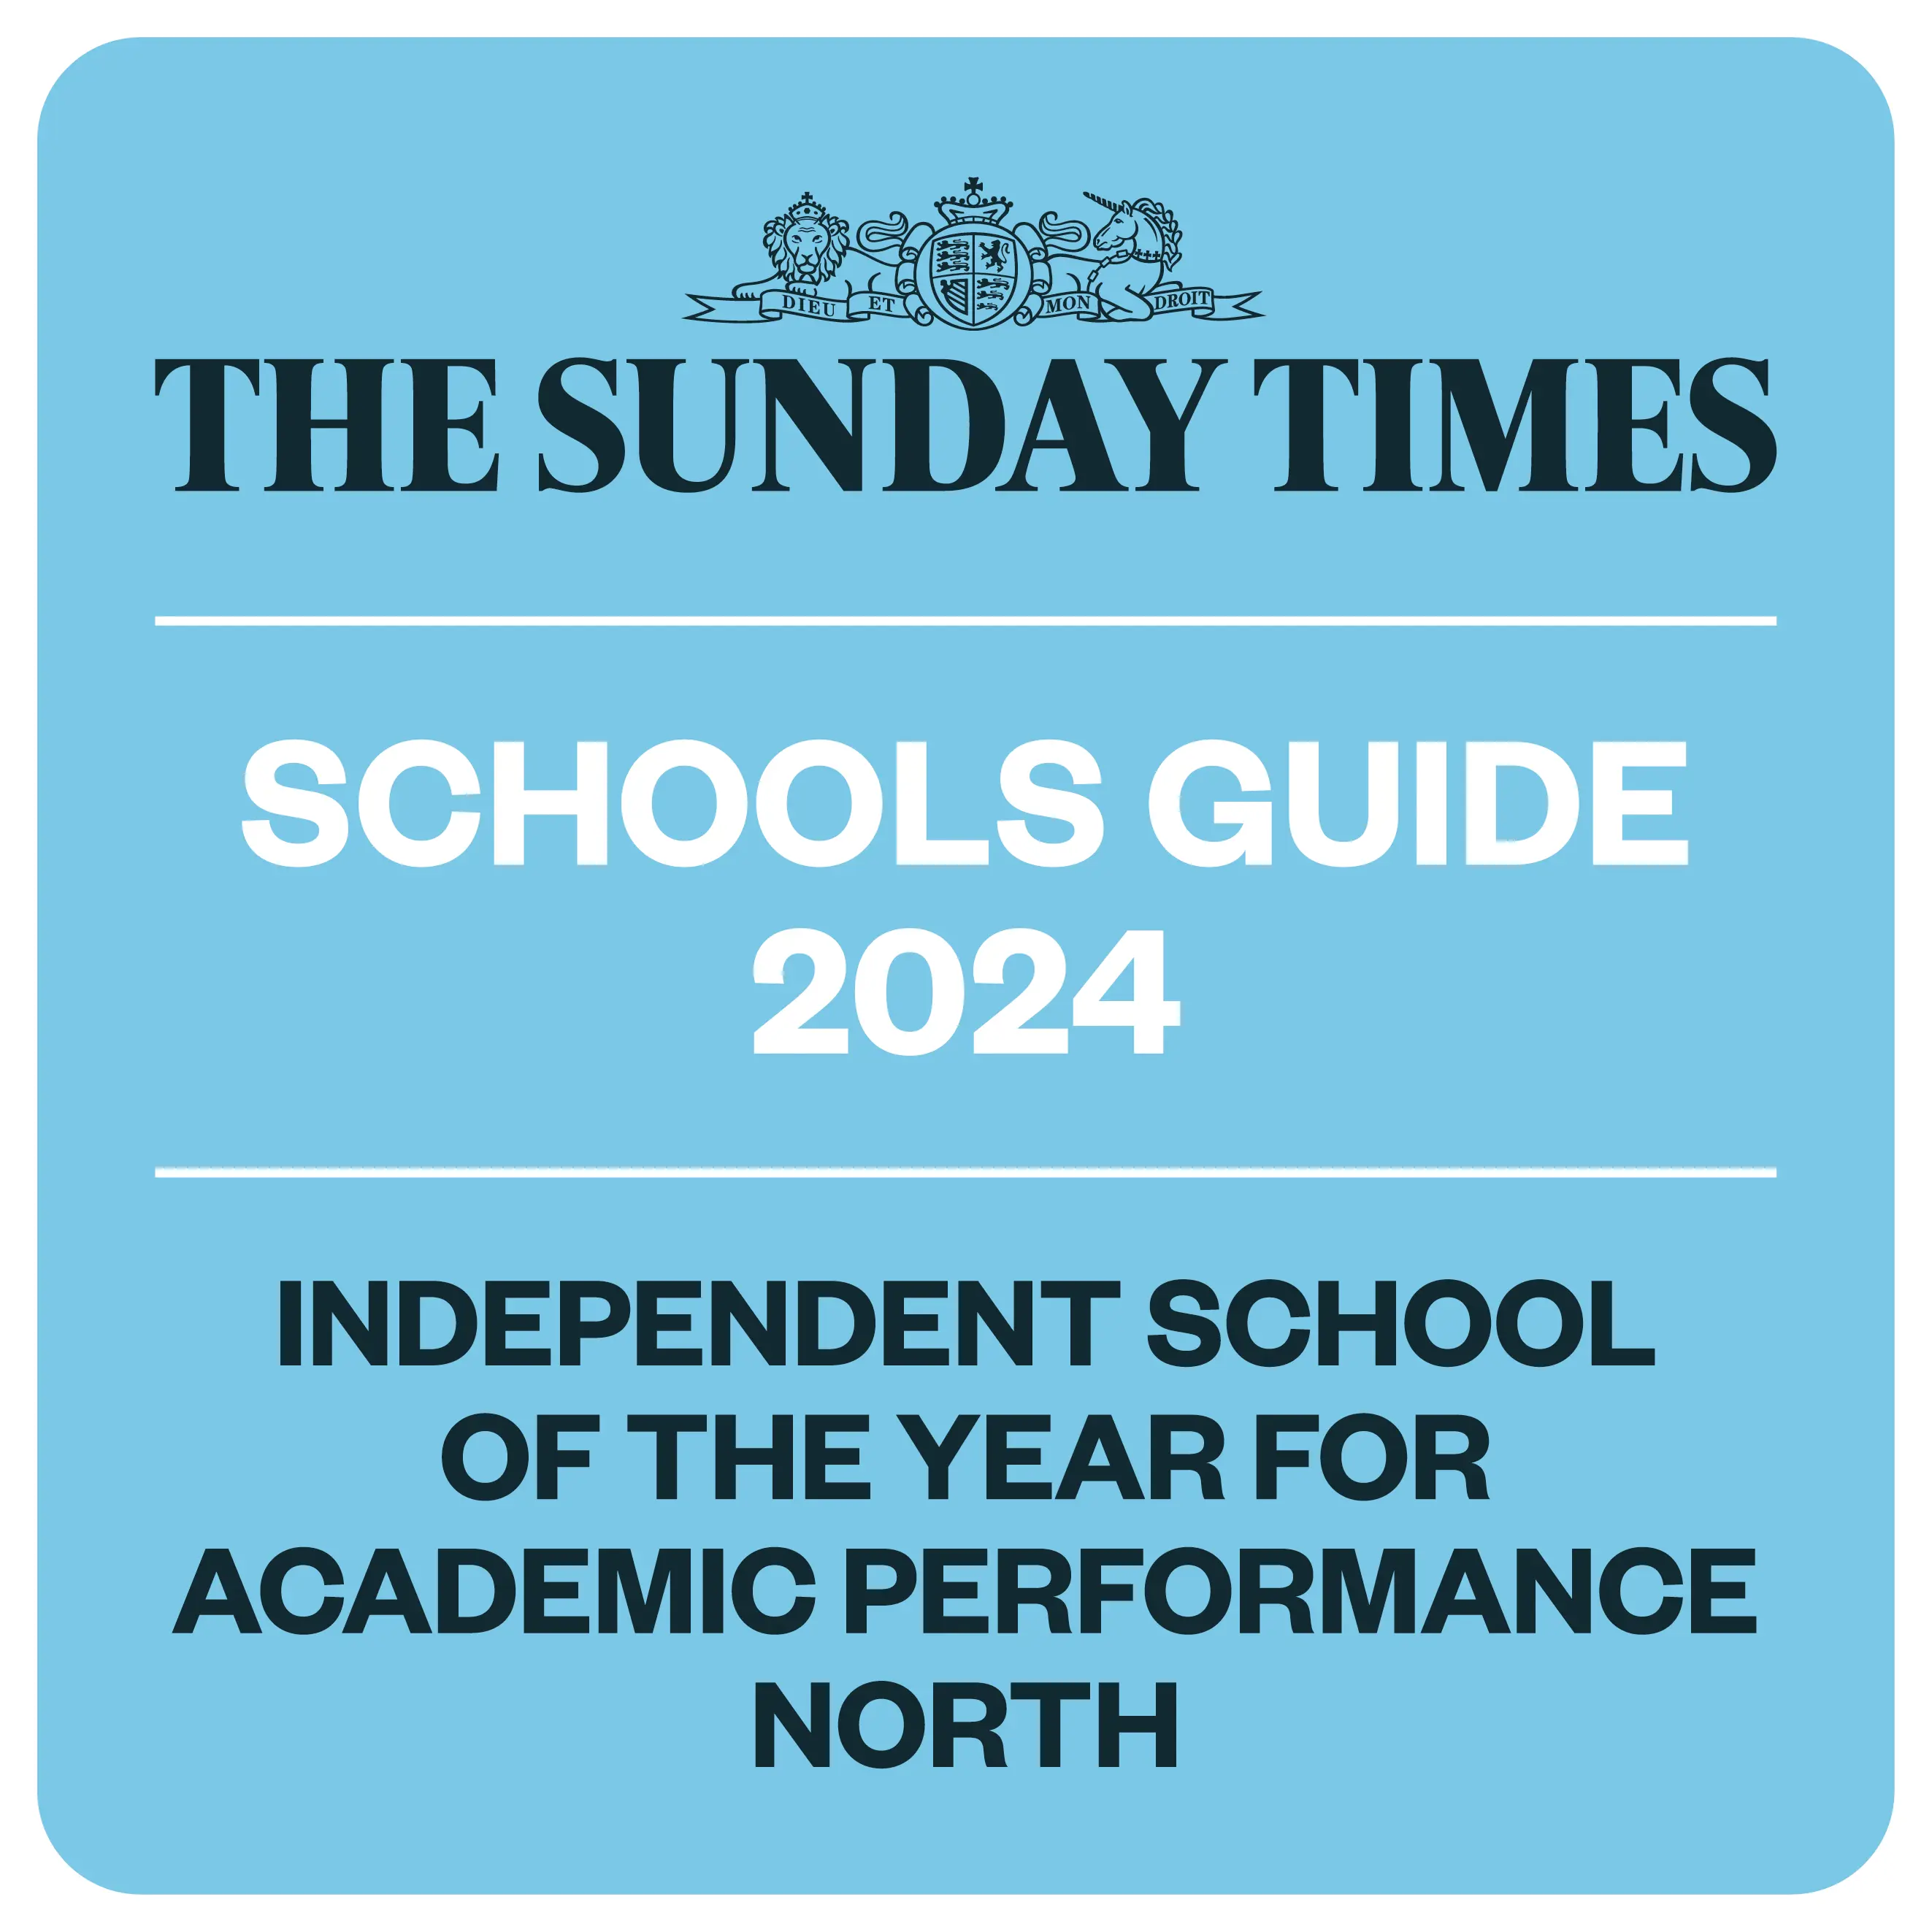 The Sunday Times Independent School For Academic Performance North